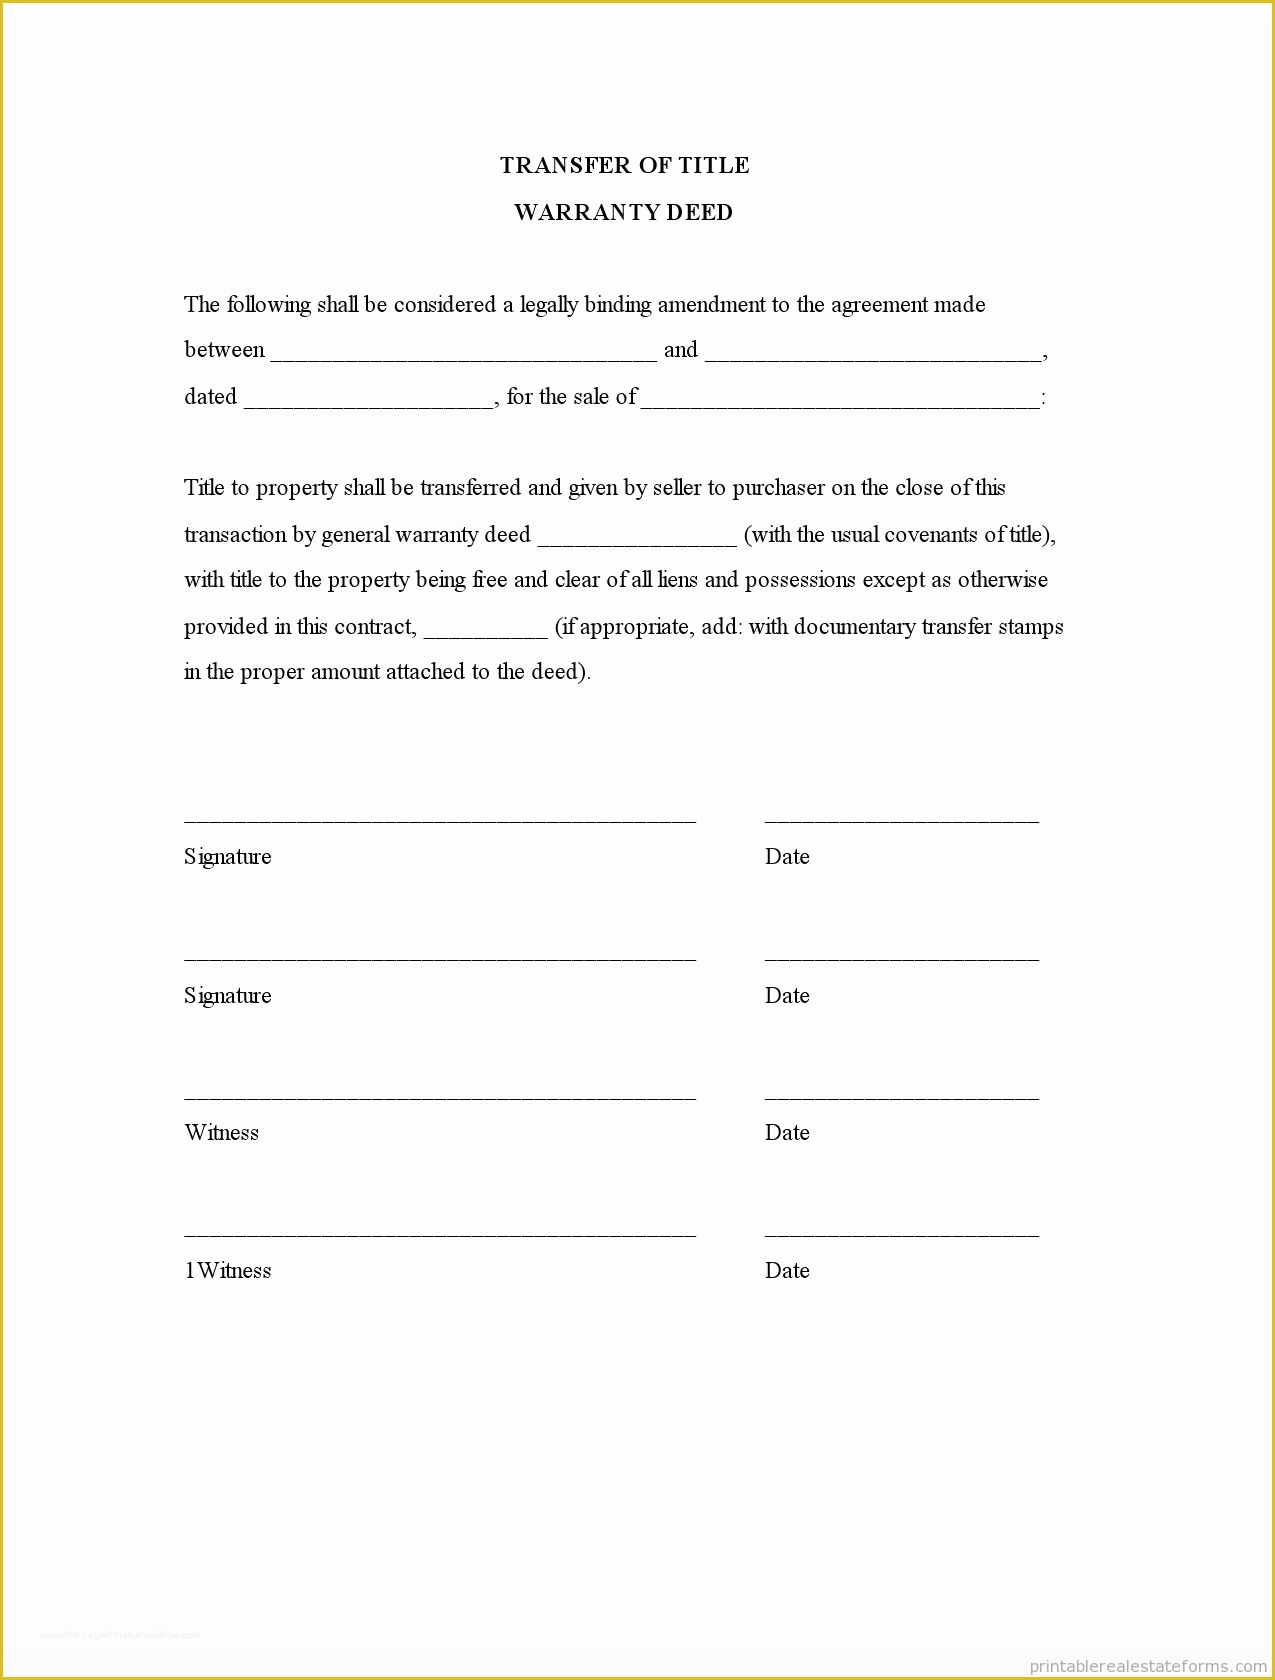 Free Printable Contract for Deed Template Of Printable Transfer Of Title Warranty Deed Template 2015